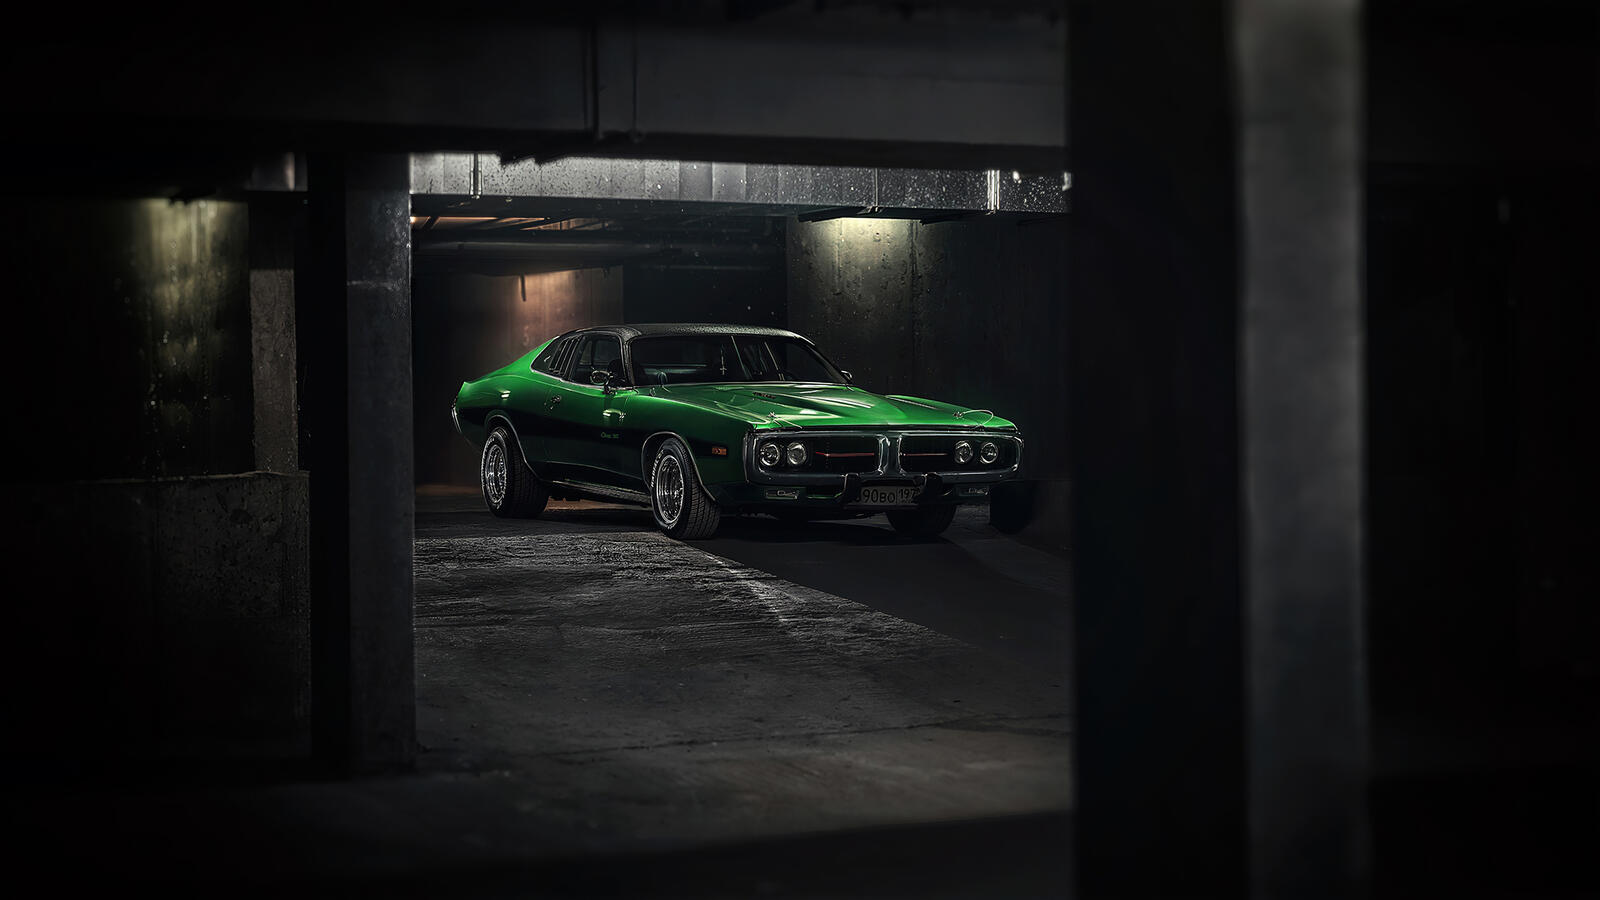 Wallpapers green car cars Dodge Charger on the desktop